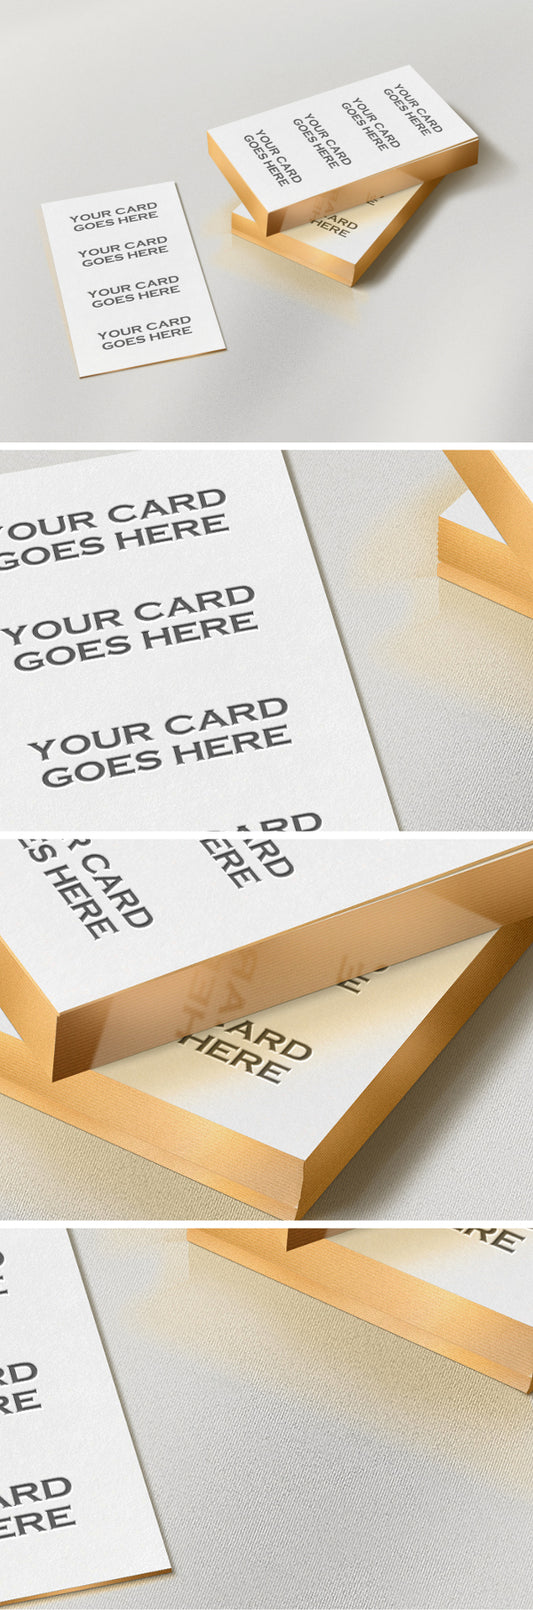 Free Gold Edge Business Cards Mockup